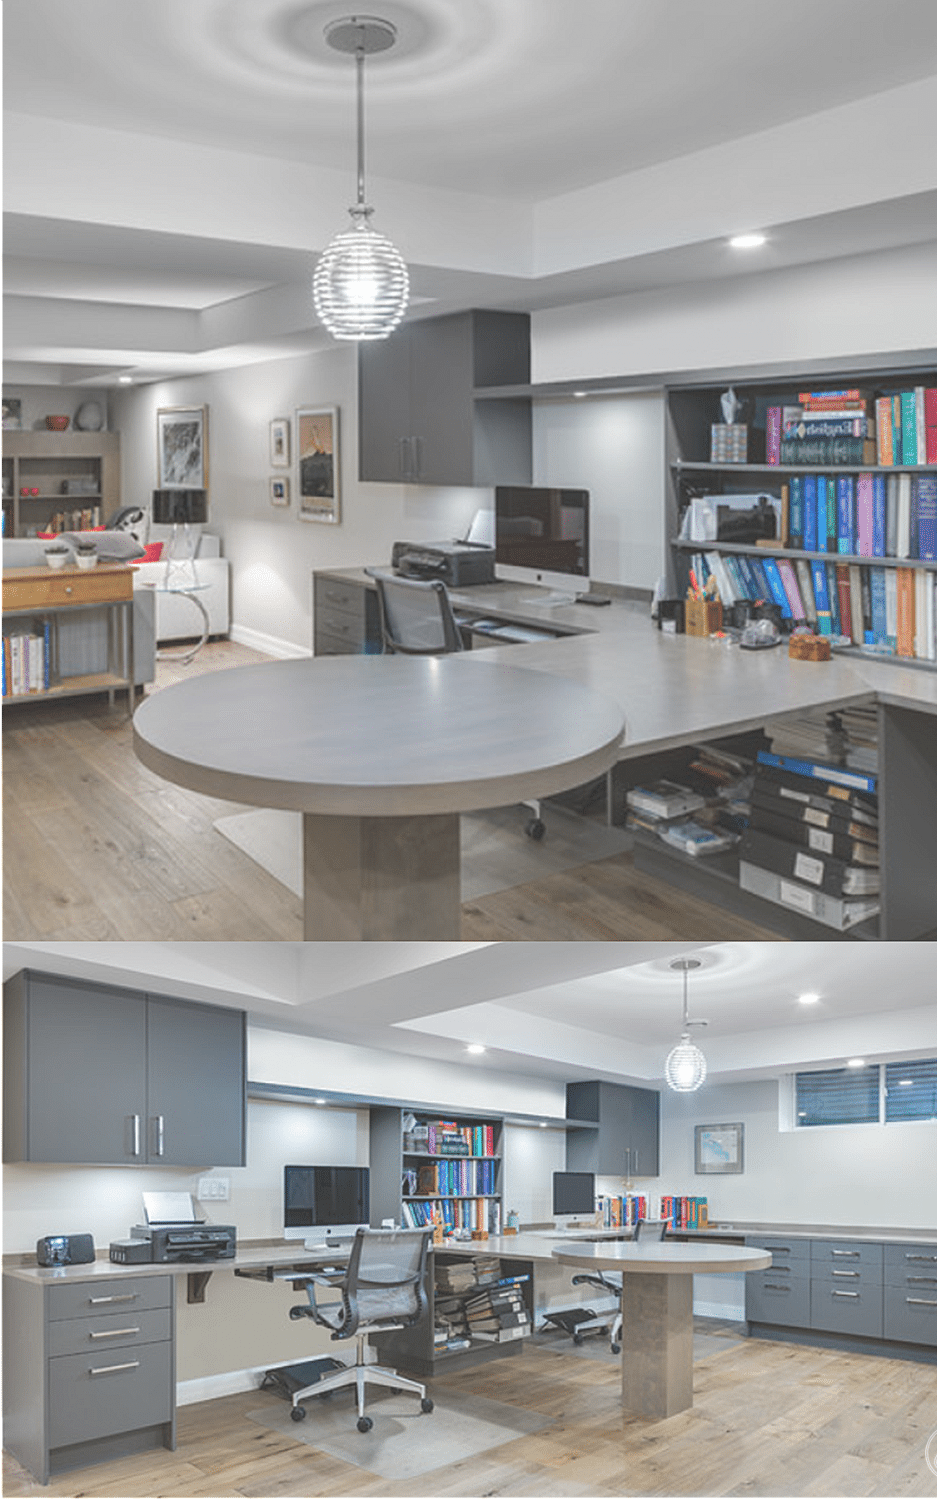 Basement Offices Ideas for her